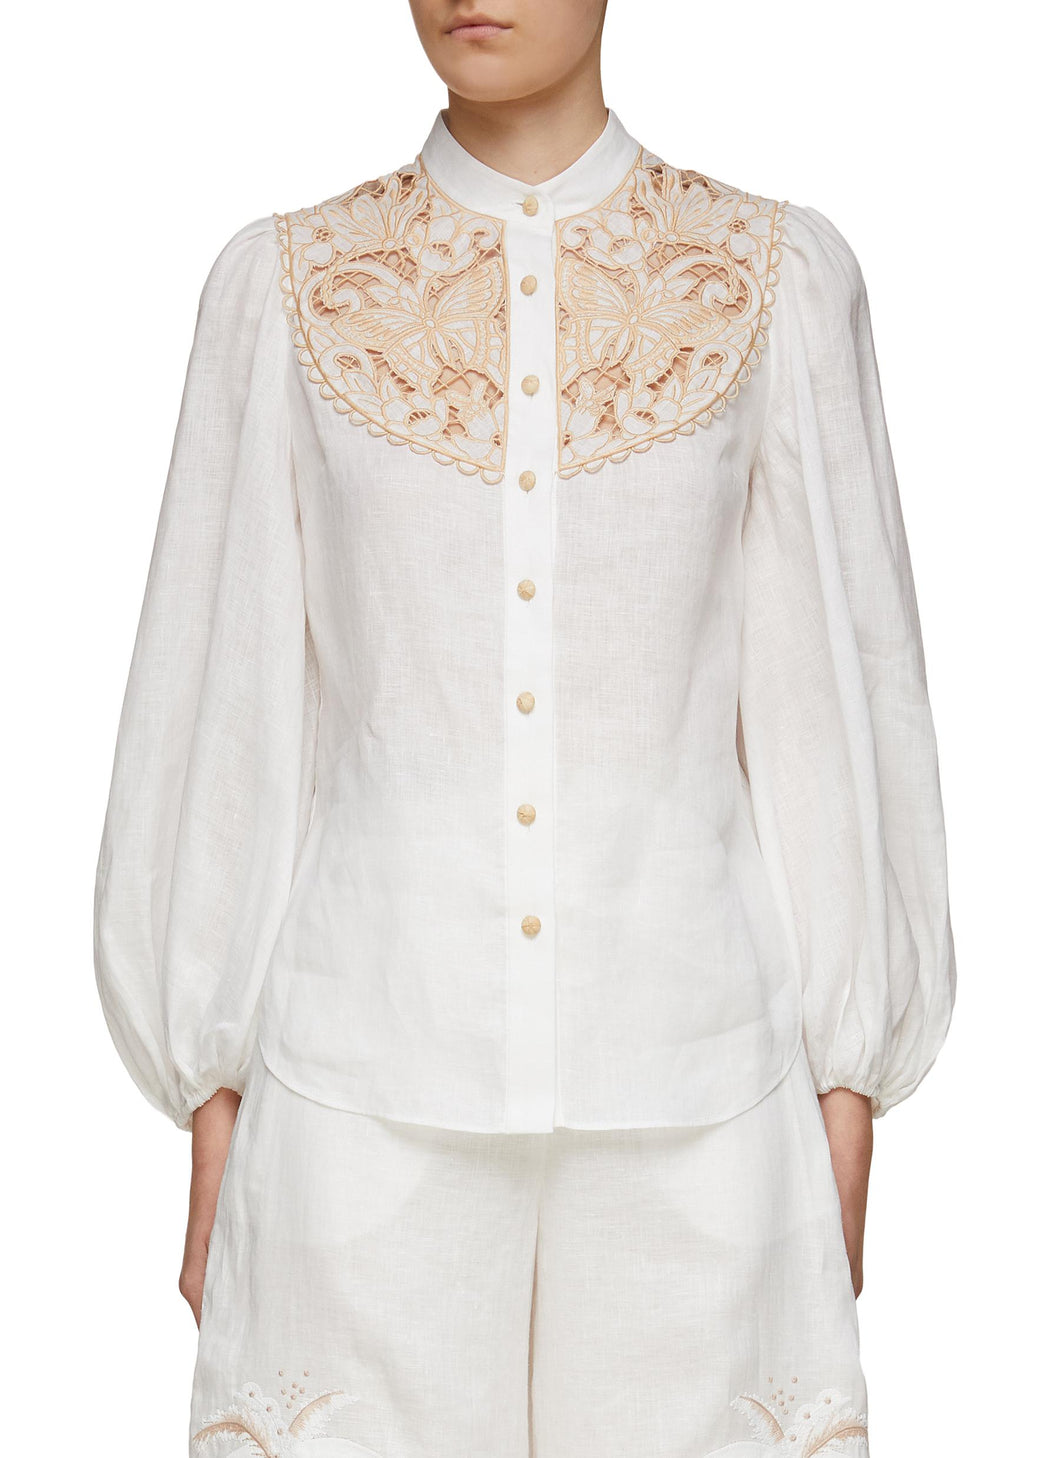 ‘JEANNIE’ BUTTERFLY EMBROIDERY LINEN BLOUSE